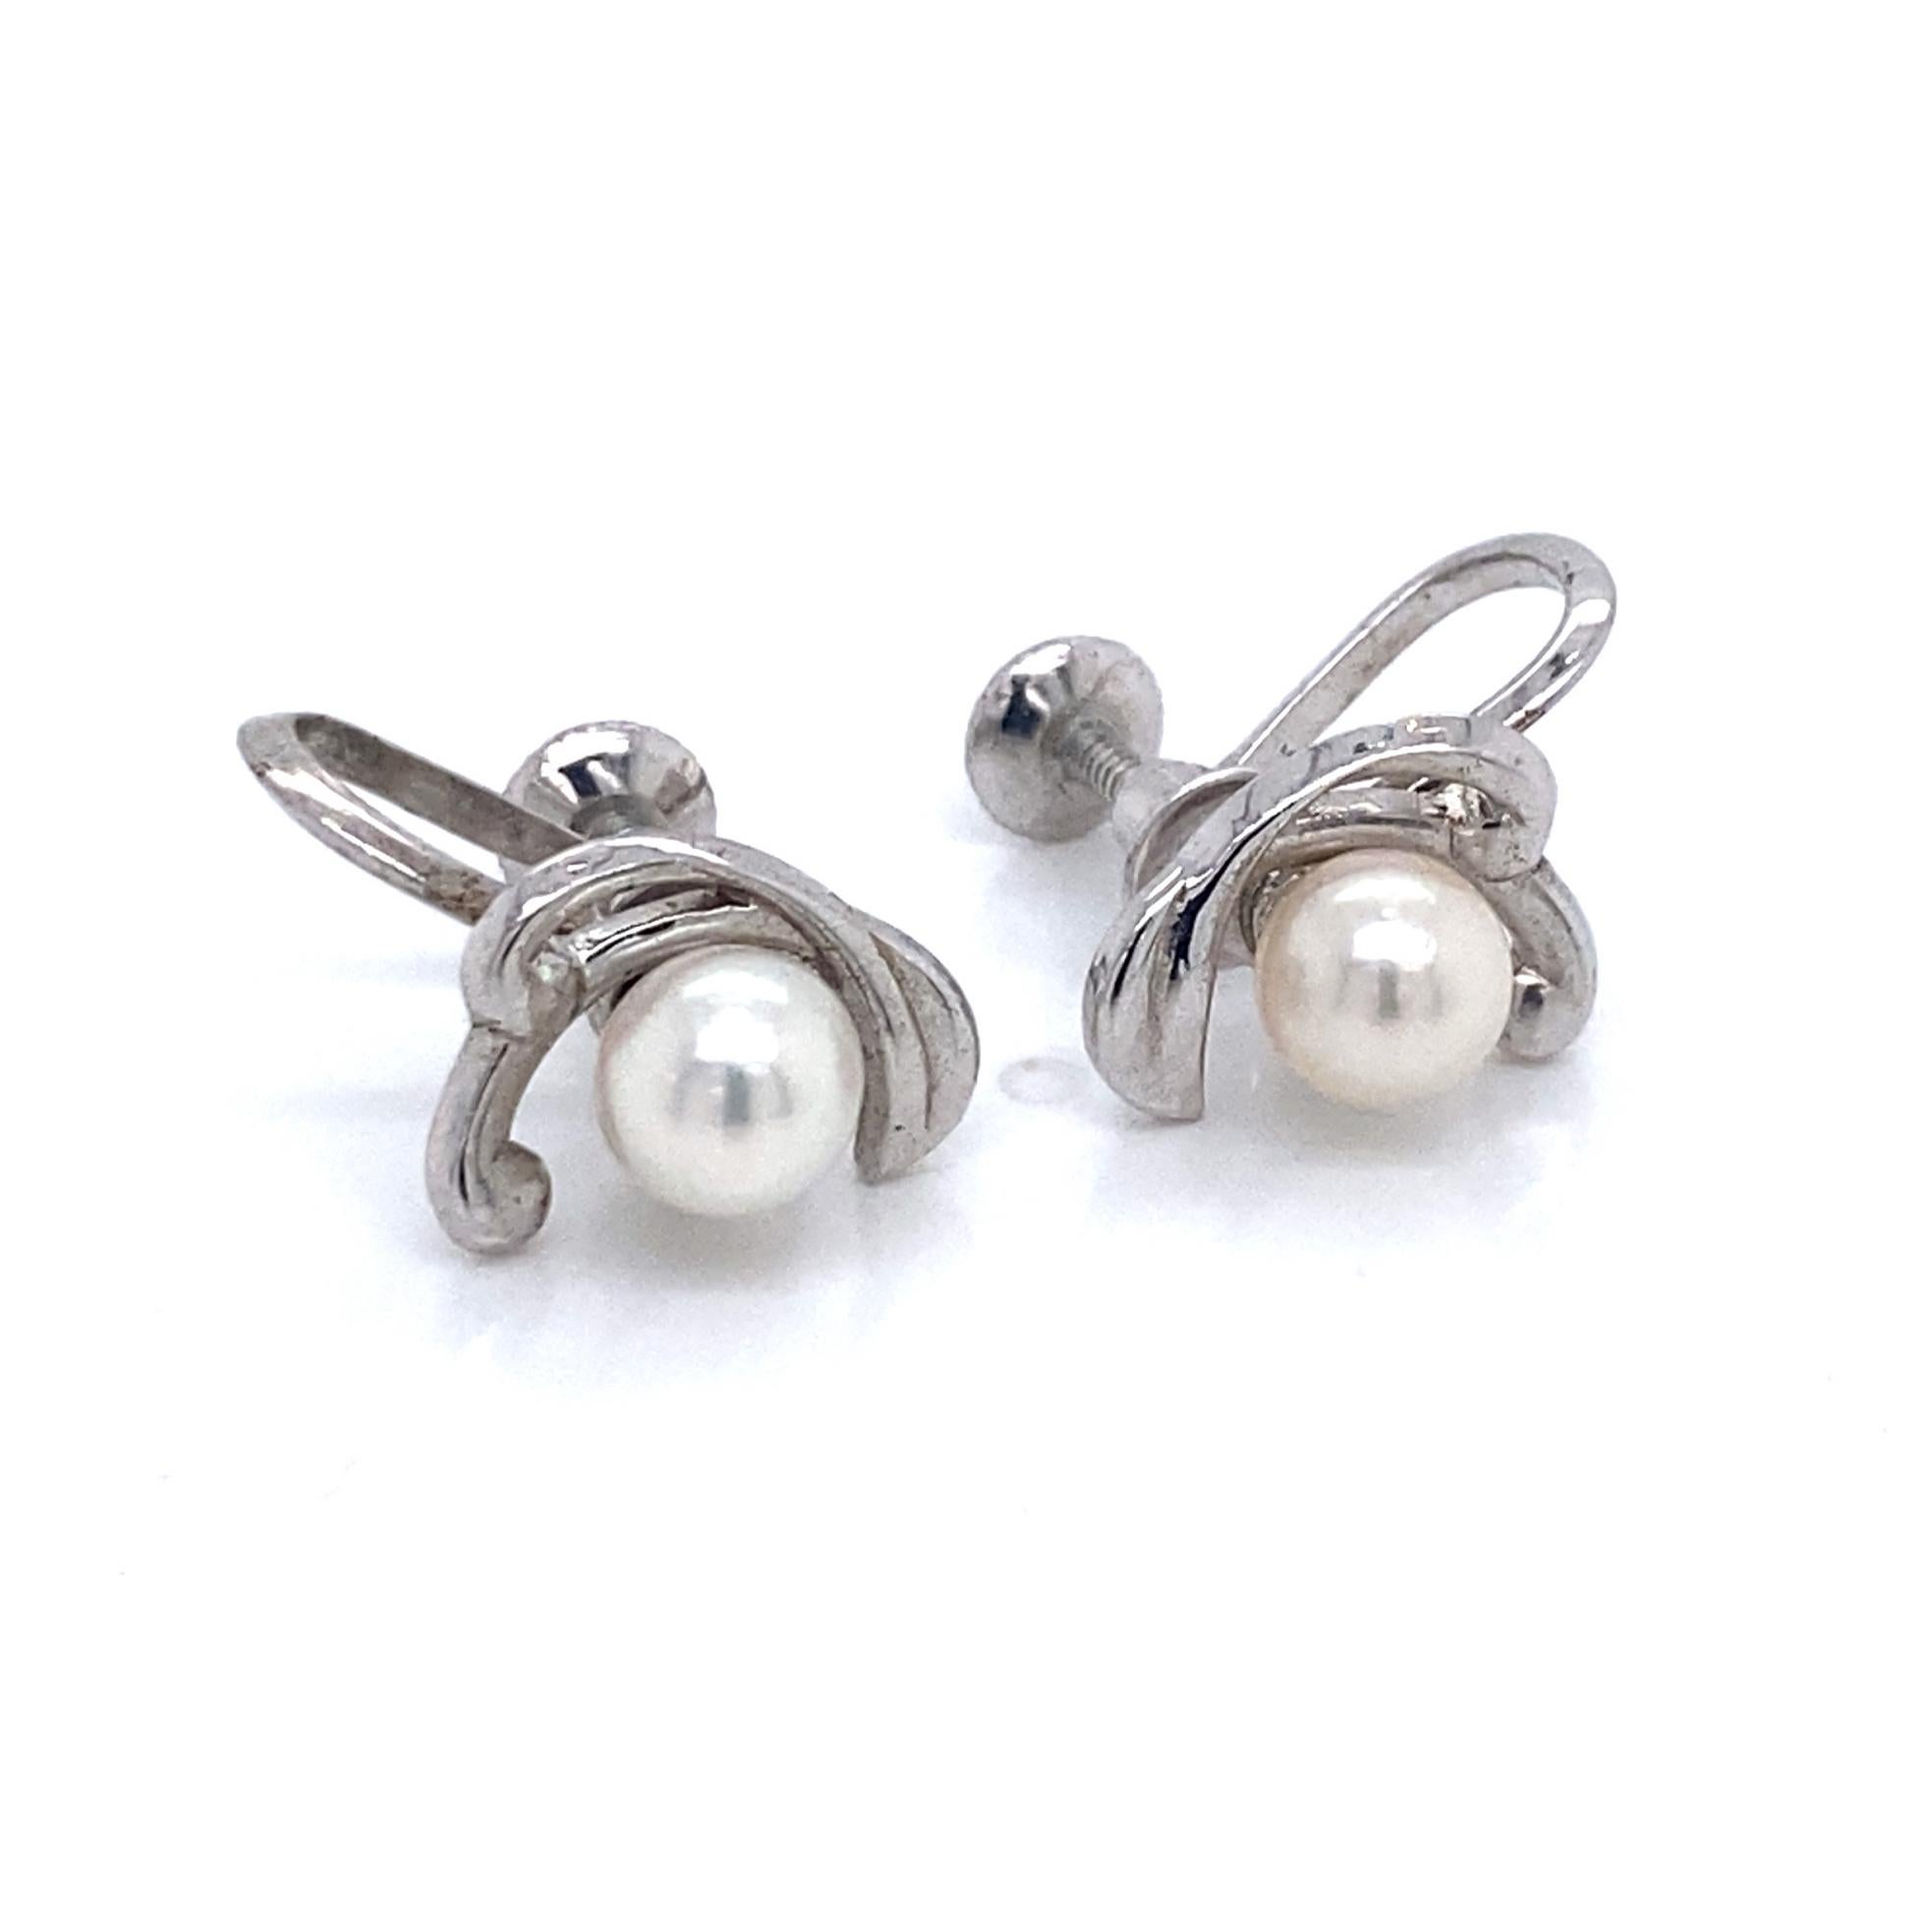 Mikimoto Estate Akoya Pearl Clip on Earrings Sterling Silver 3.53 Grams For Sale 2